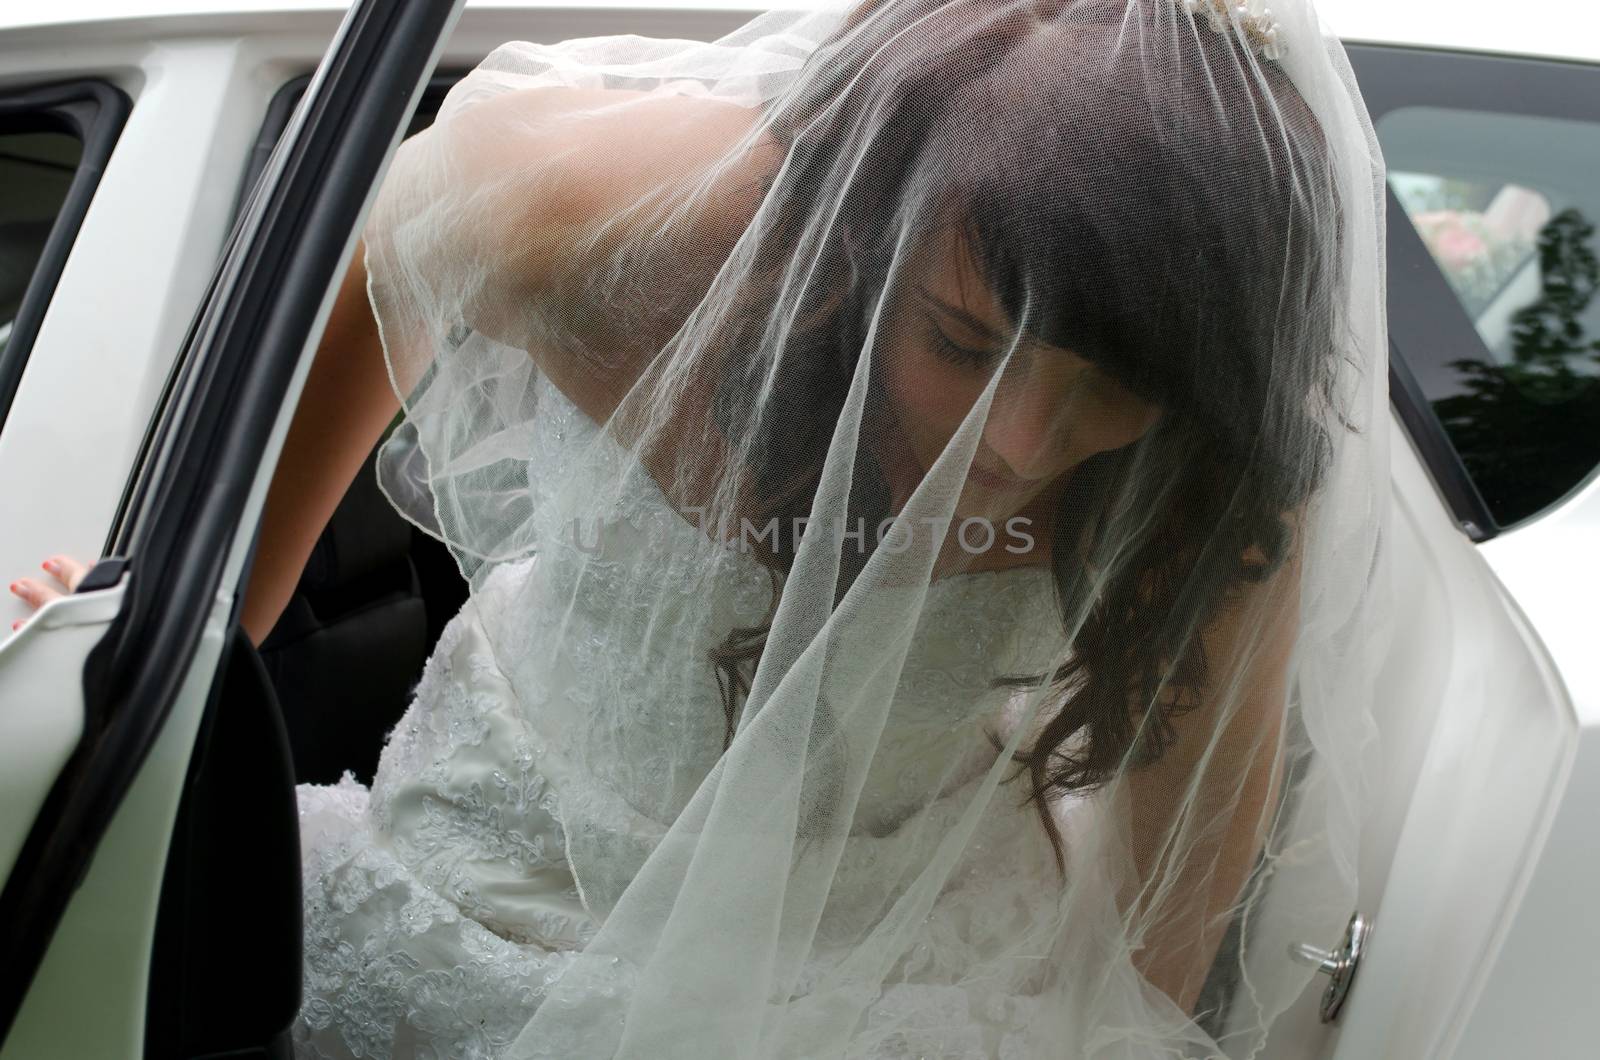 Beautiful South African bride leaving car on way to wedding